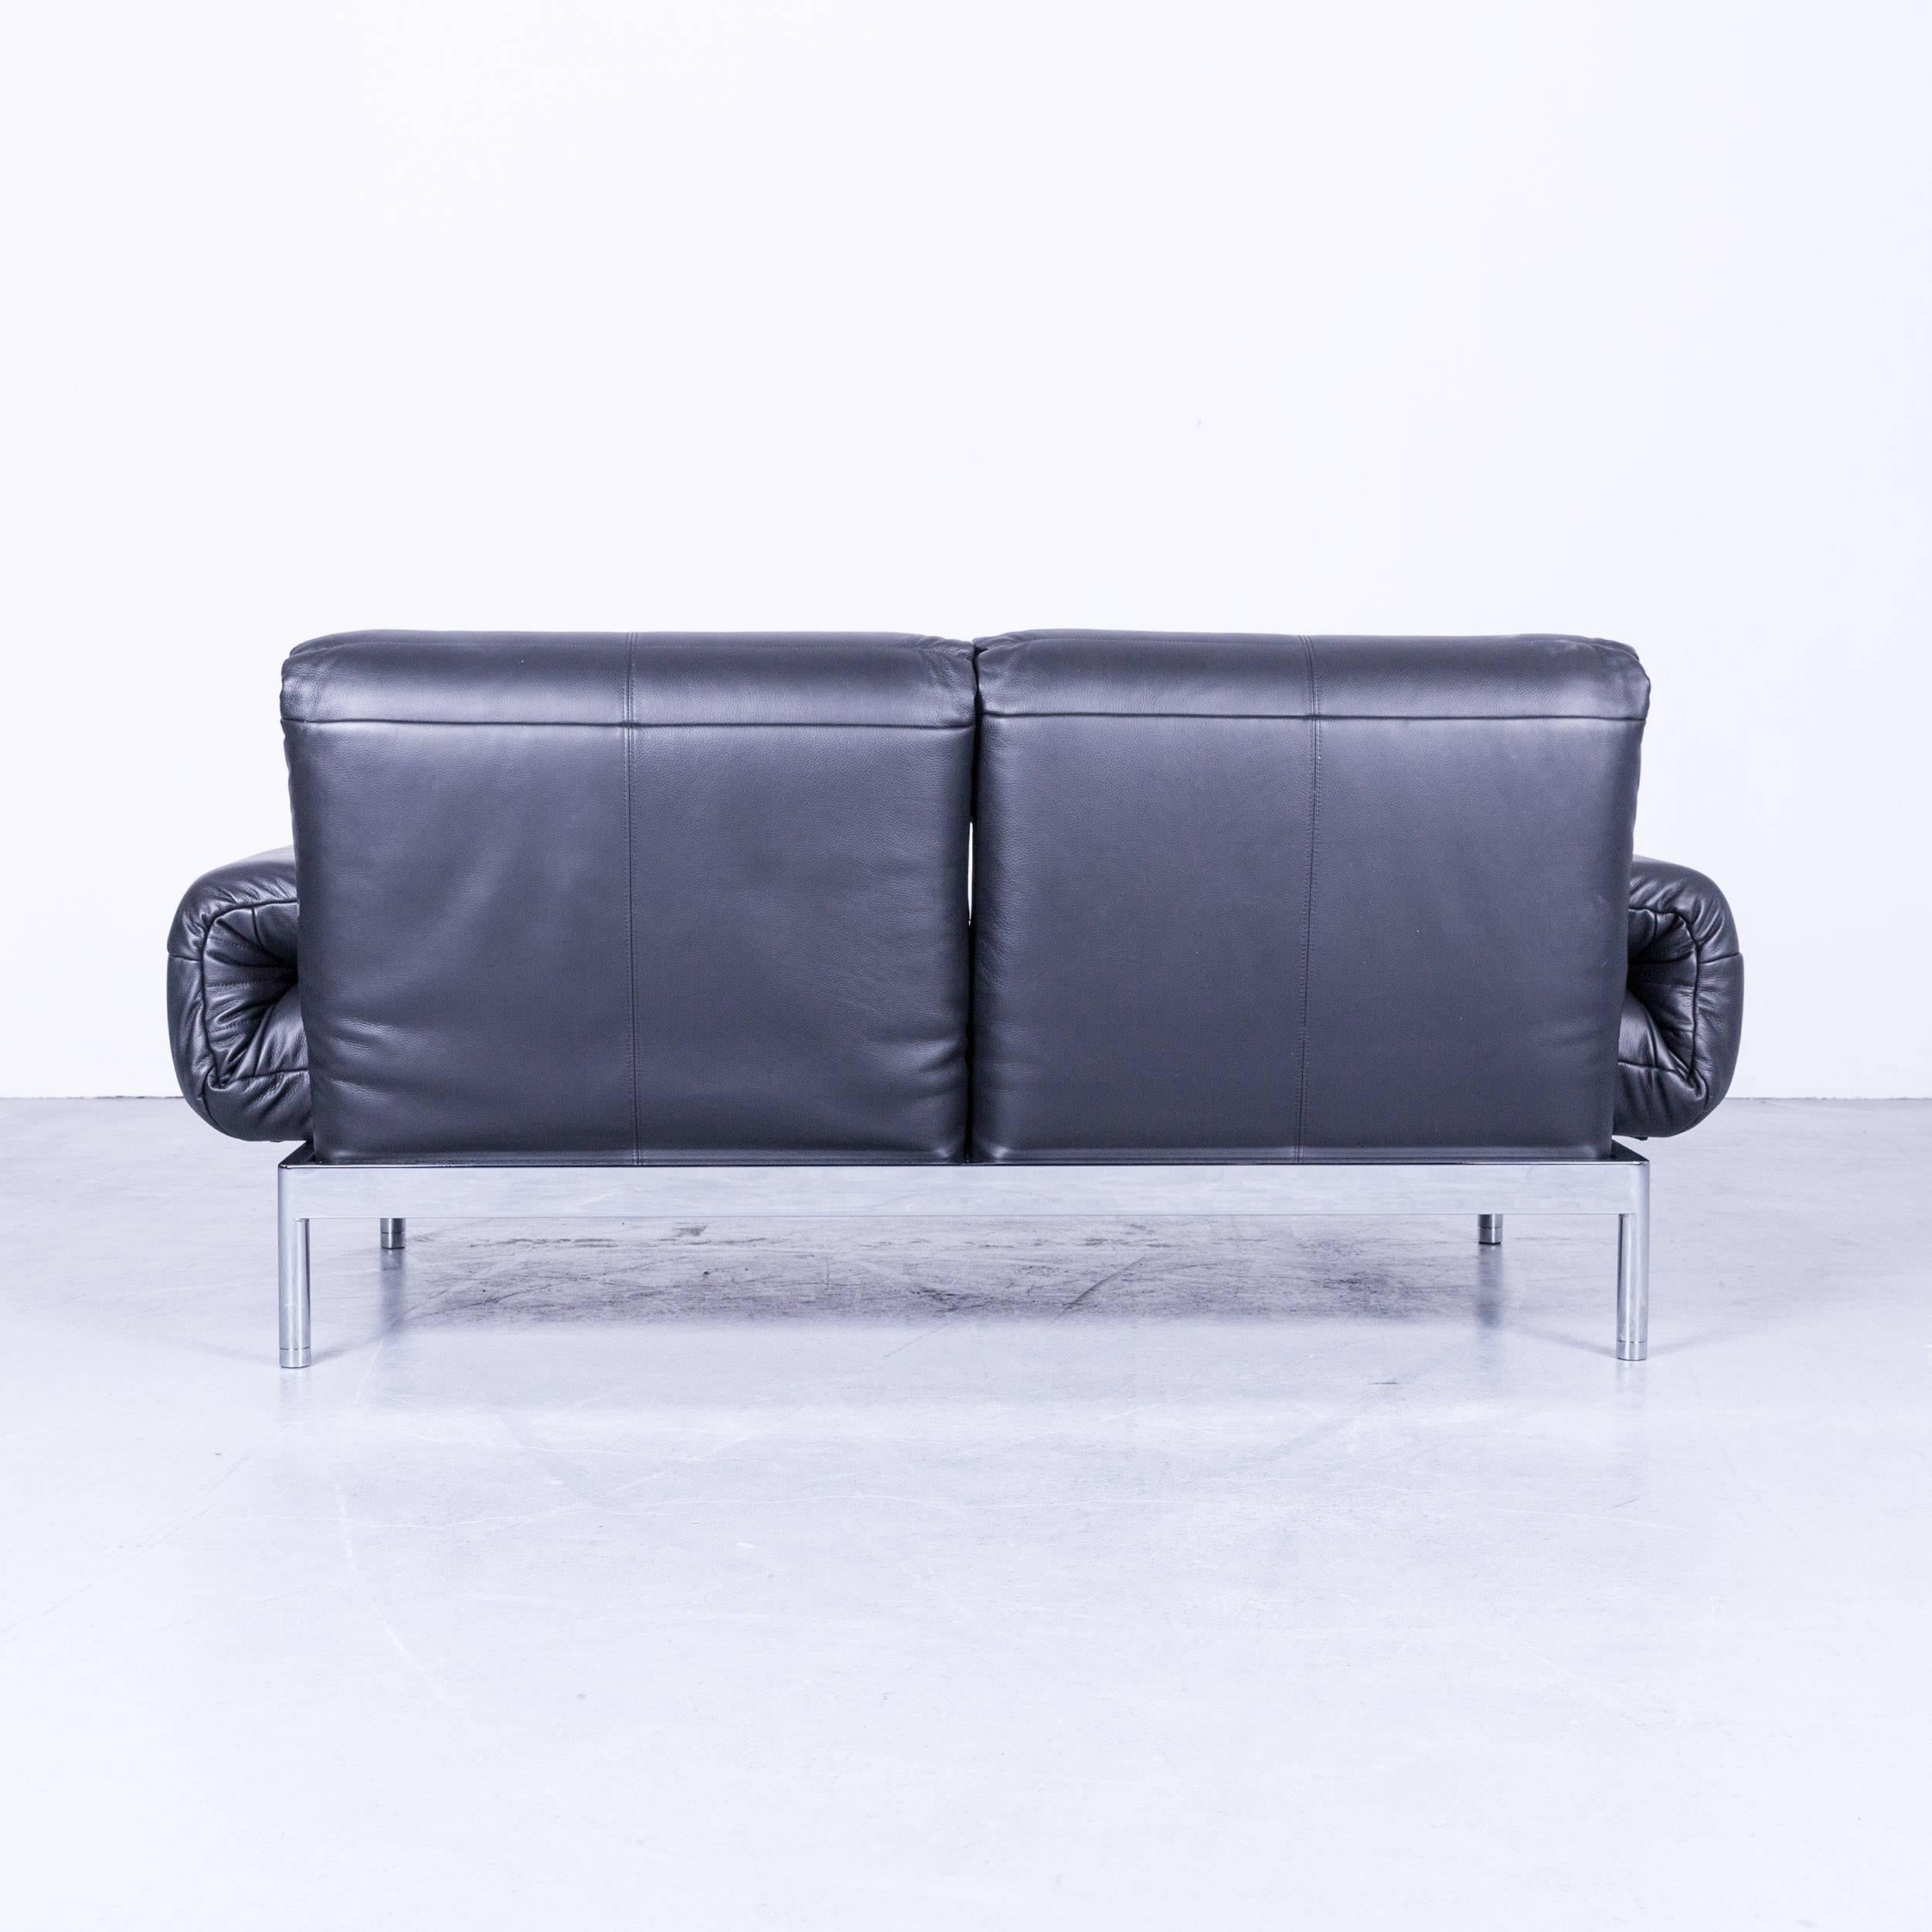 Rolf Benz Plura Designer Sofa Leather Black Relax Function Couch Modern 5